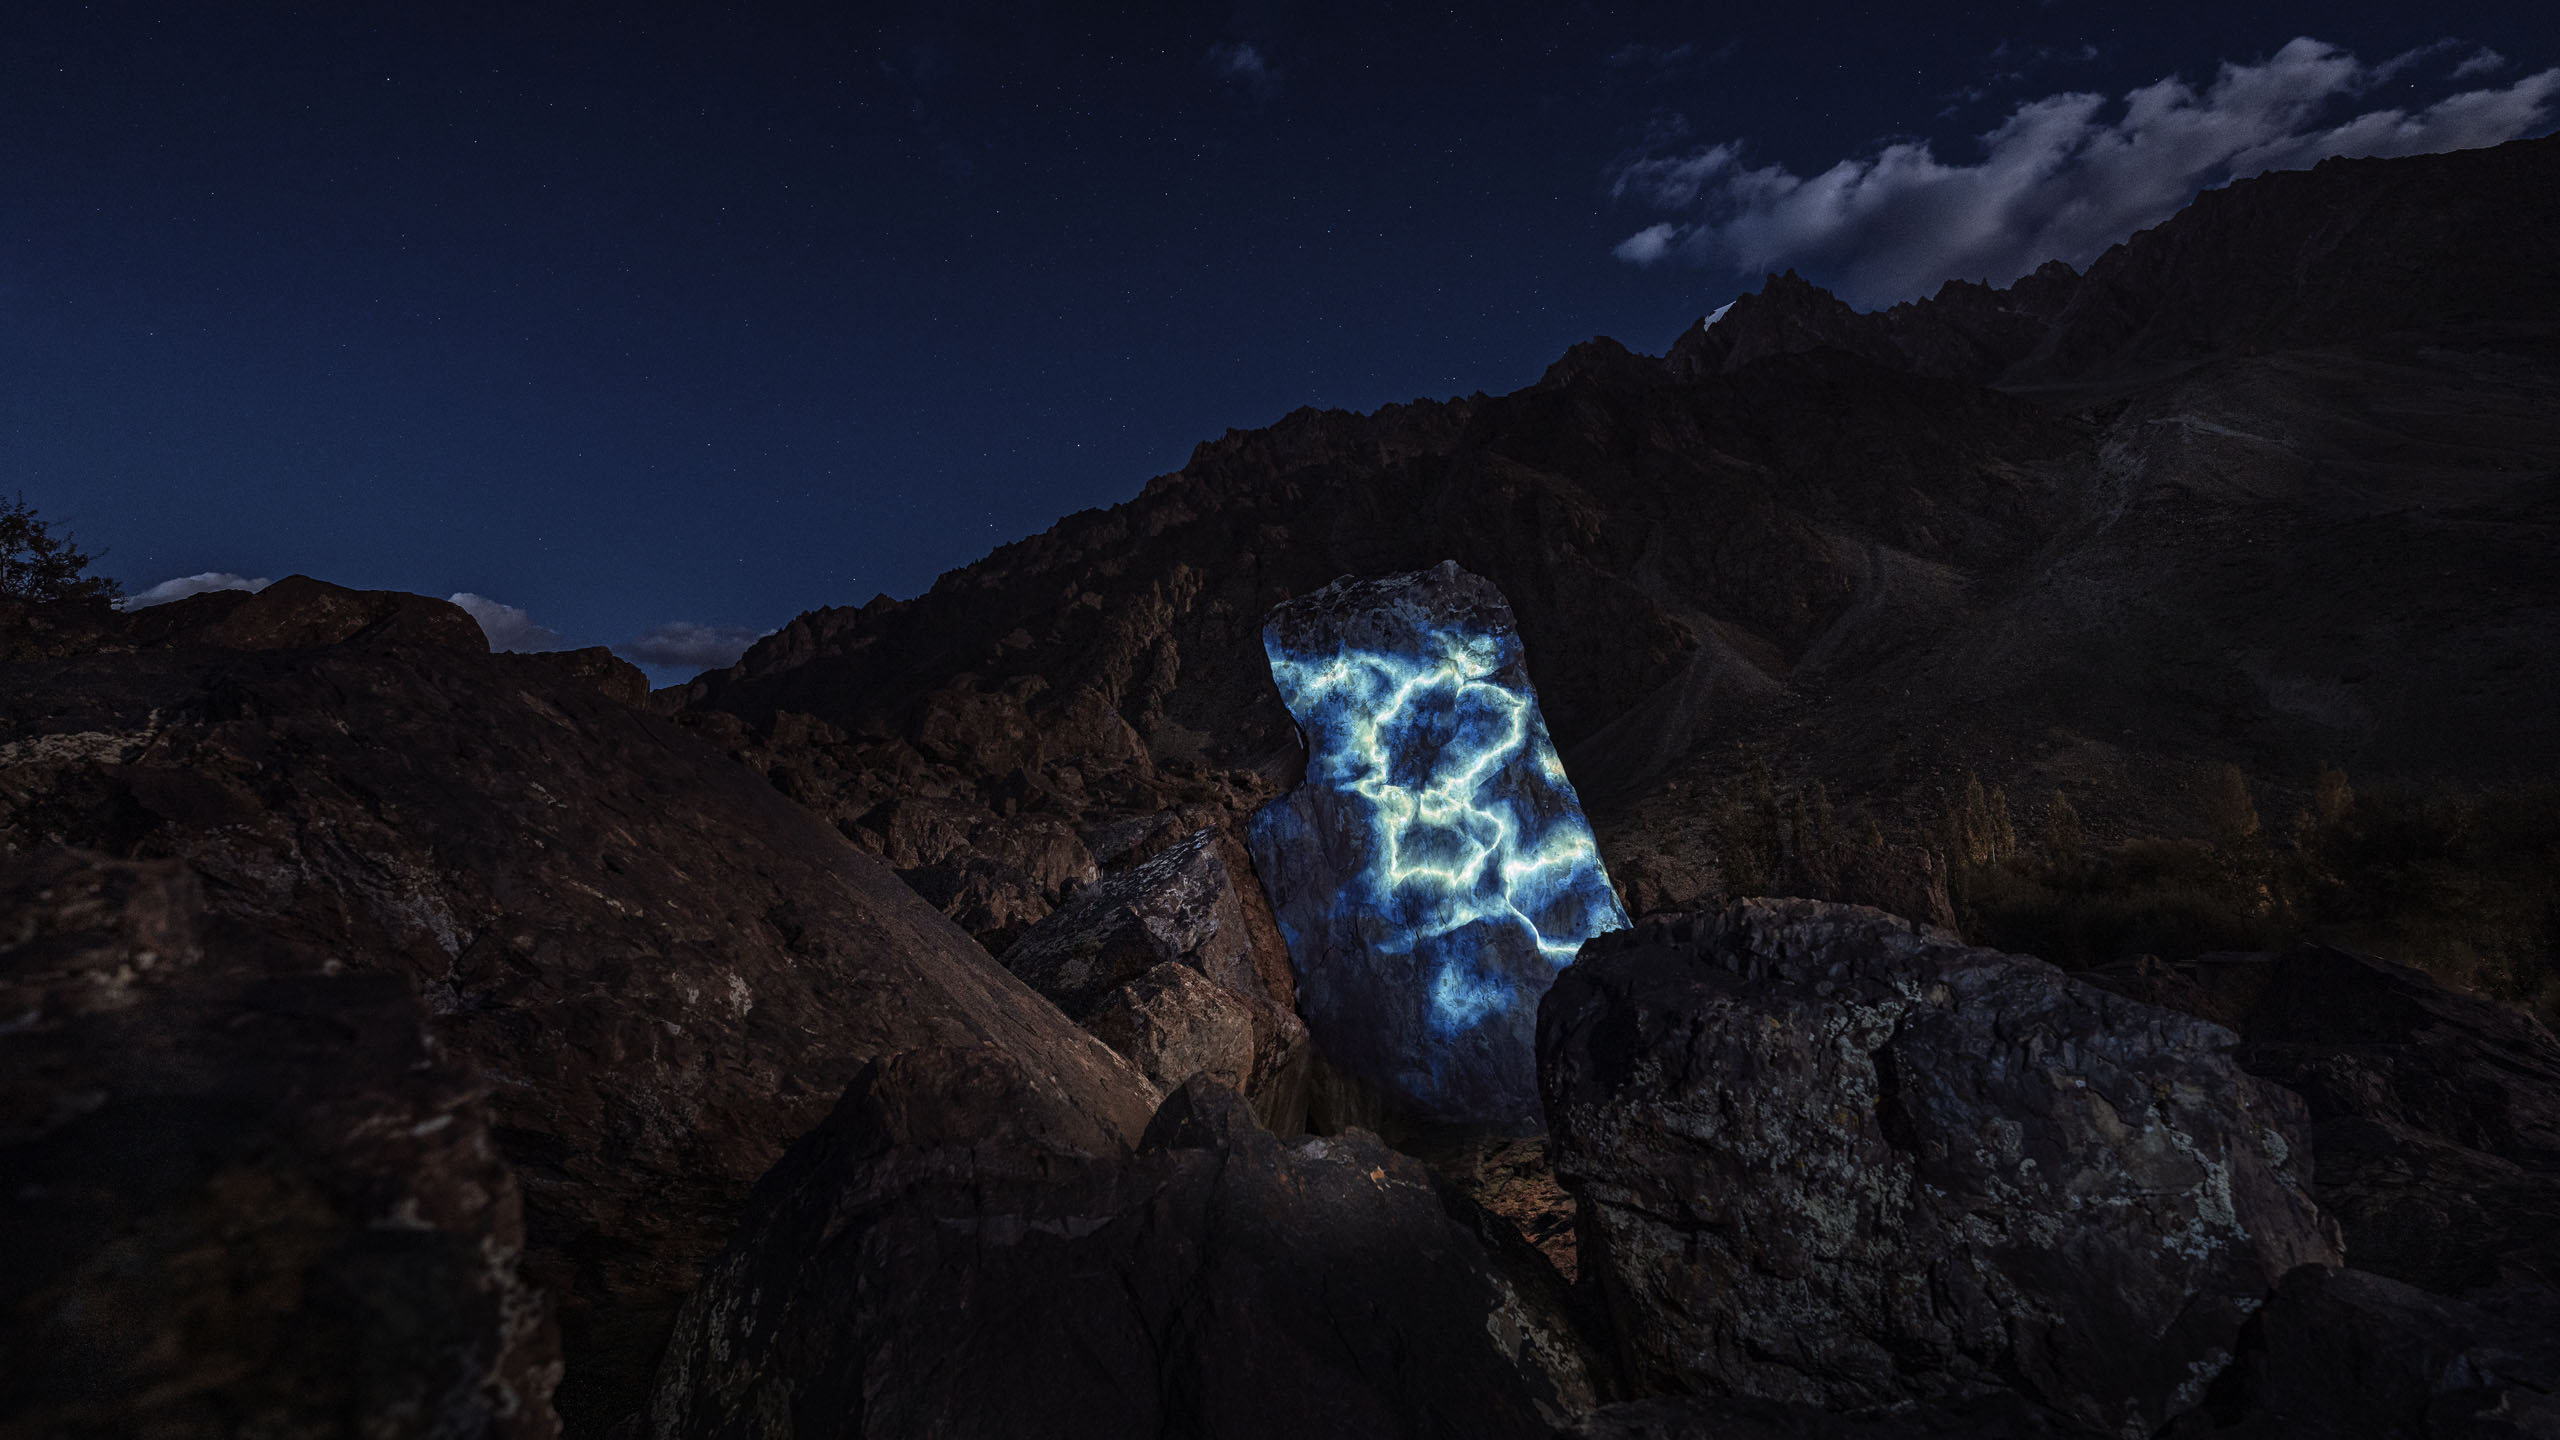 Land art projection mapping with blue abstract visuals on a rock in the Himalayan landscape 